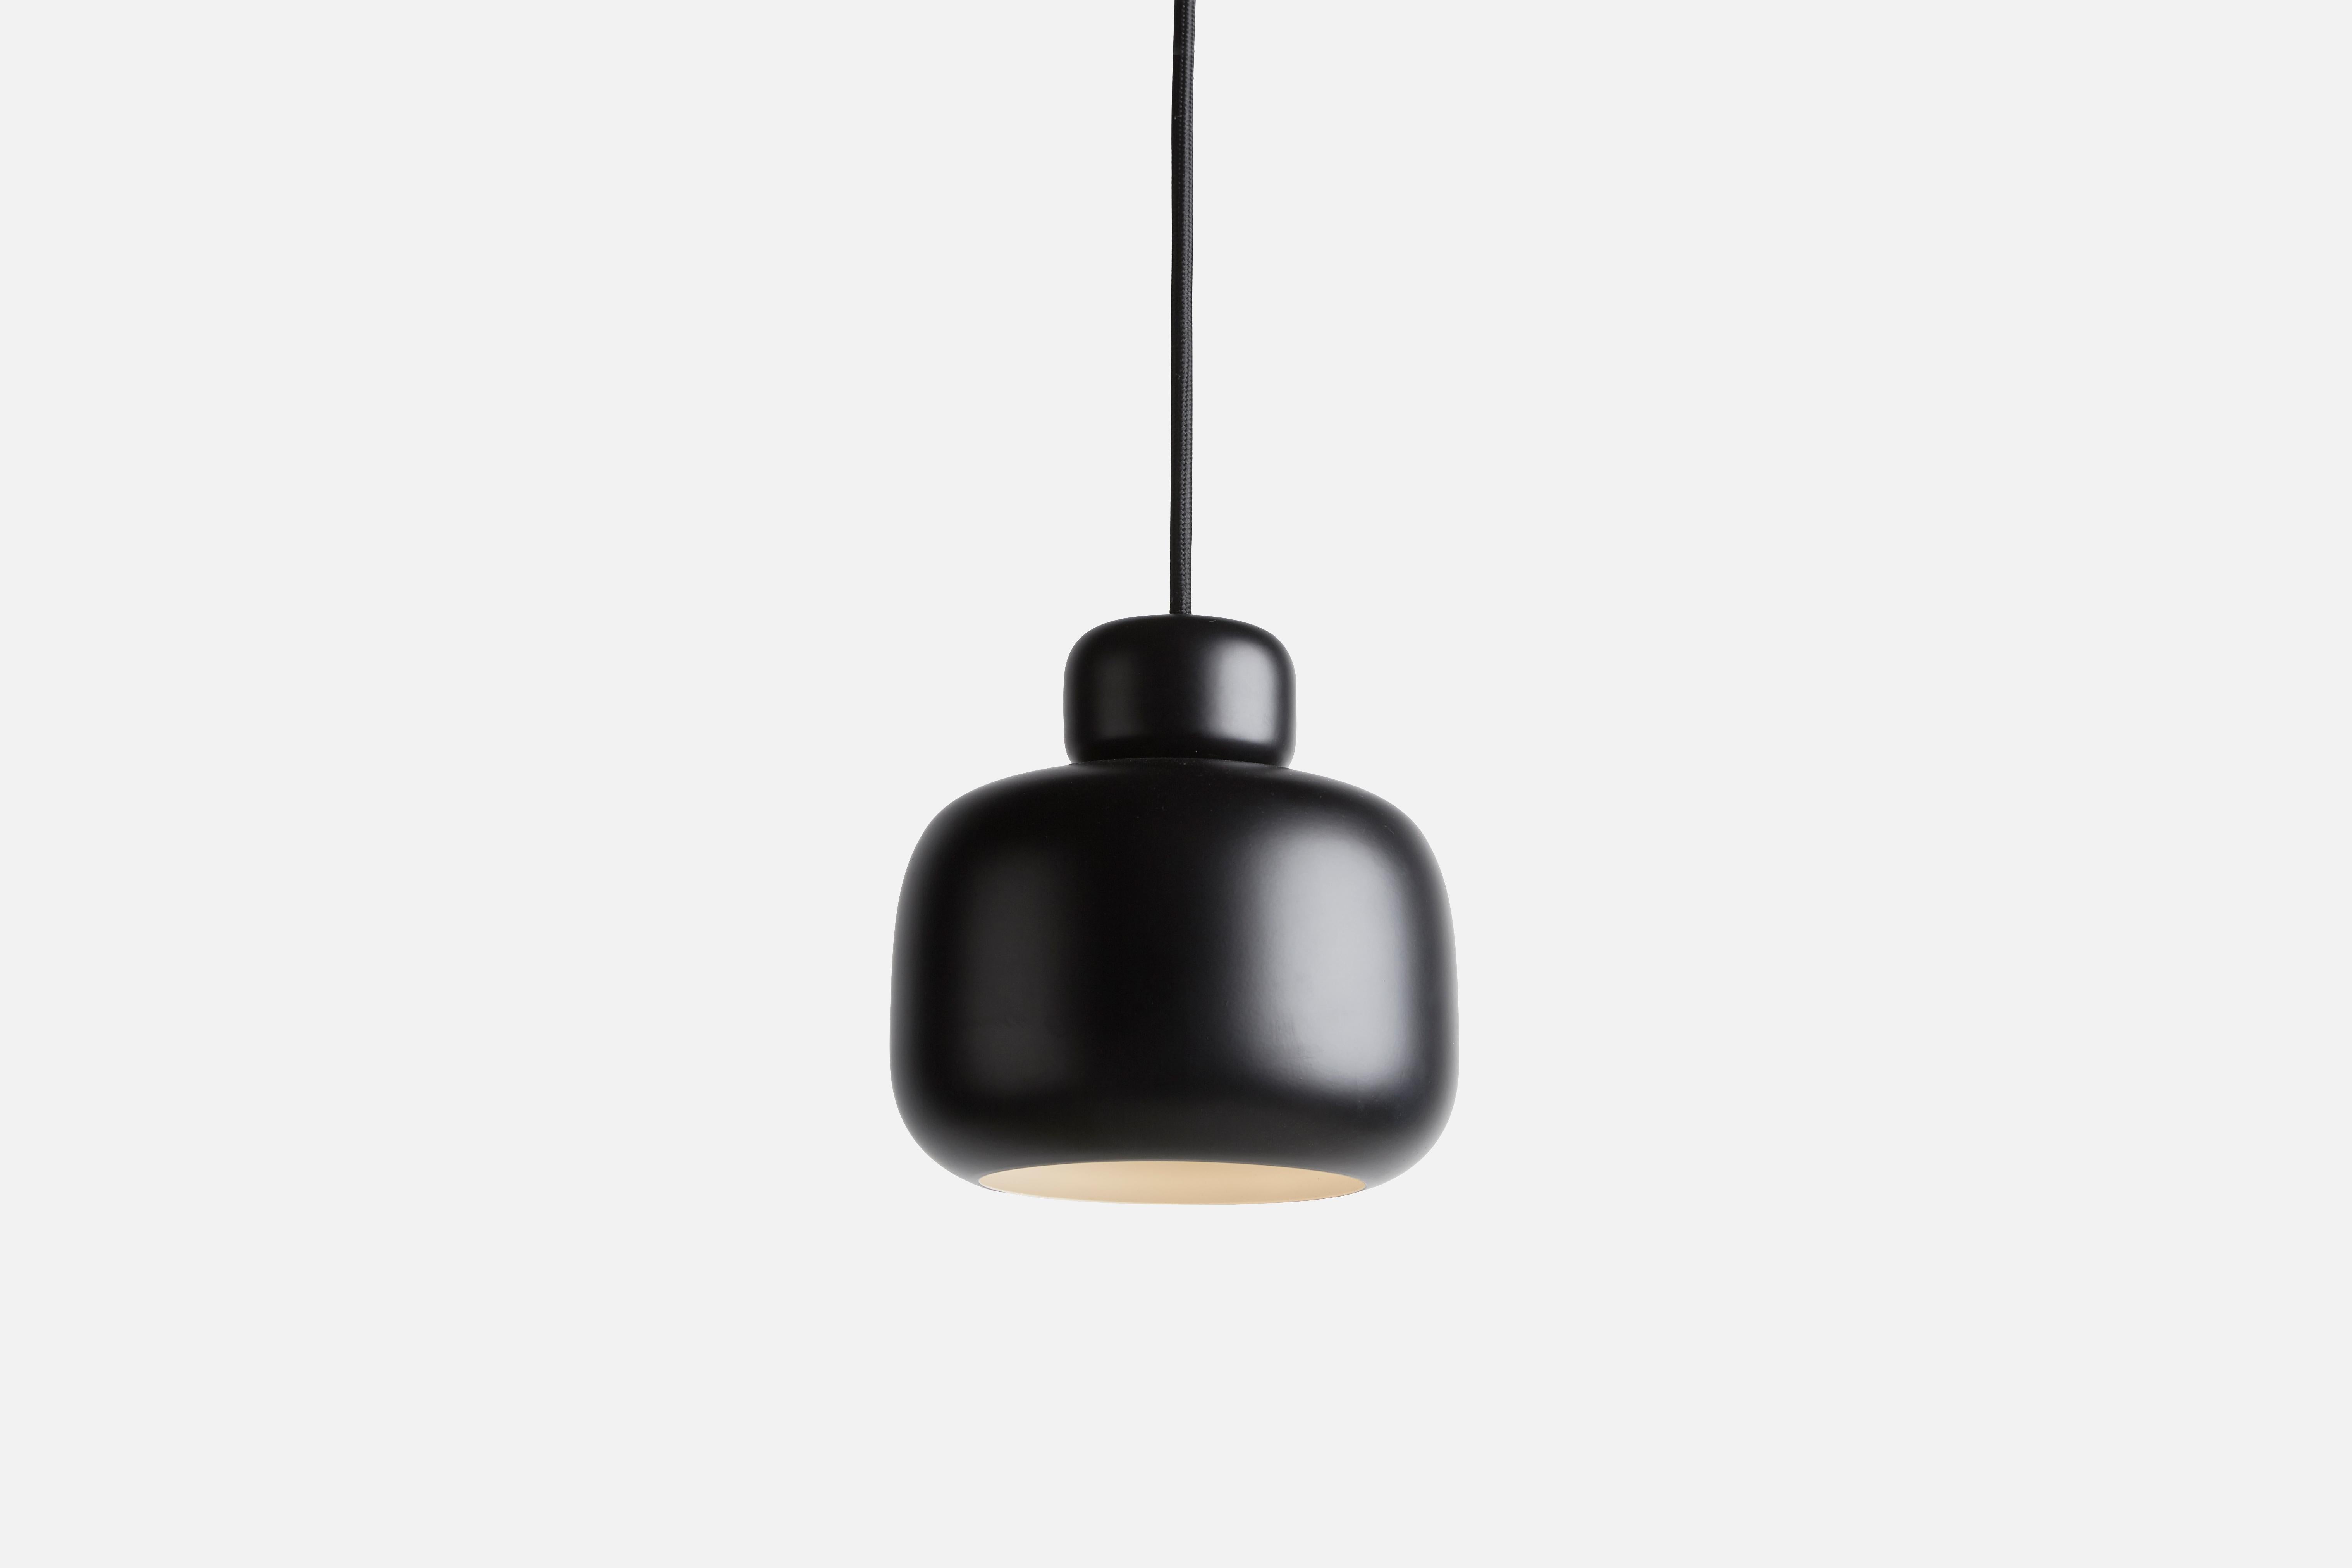 Black Stone pendant lamp by Philip Bro
Materials: Metal.
Dimensions: D 15.9 x H 16 cm
Available in yellow, white and black.

Philip Bro is an experienced Danish designer with a drive to prove that serious design can still be stylish, playful